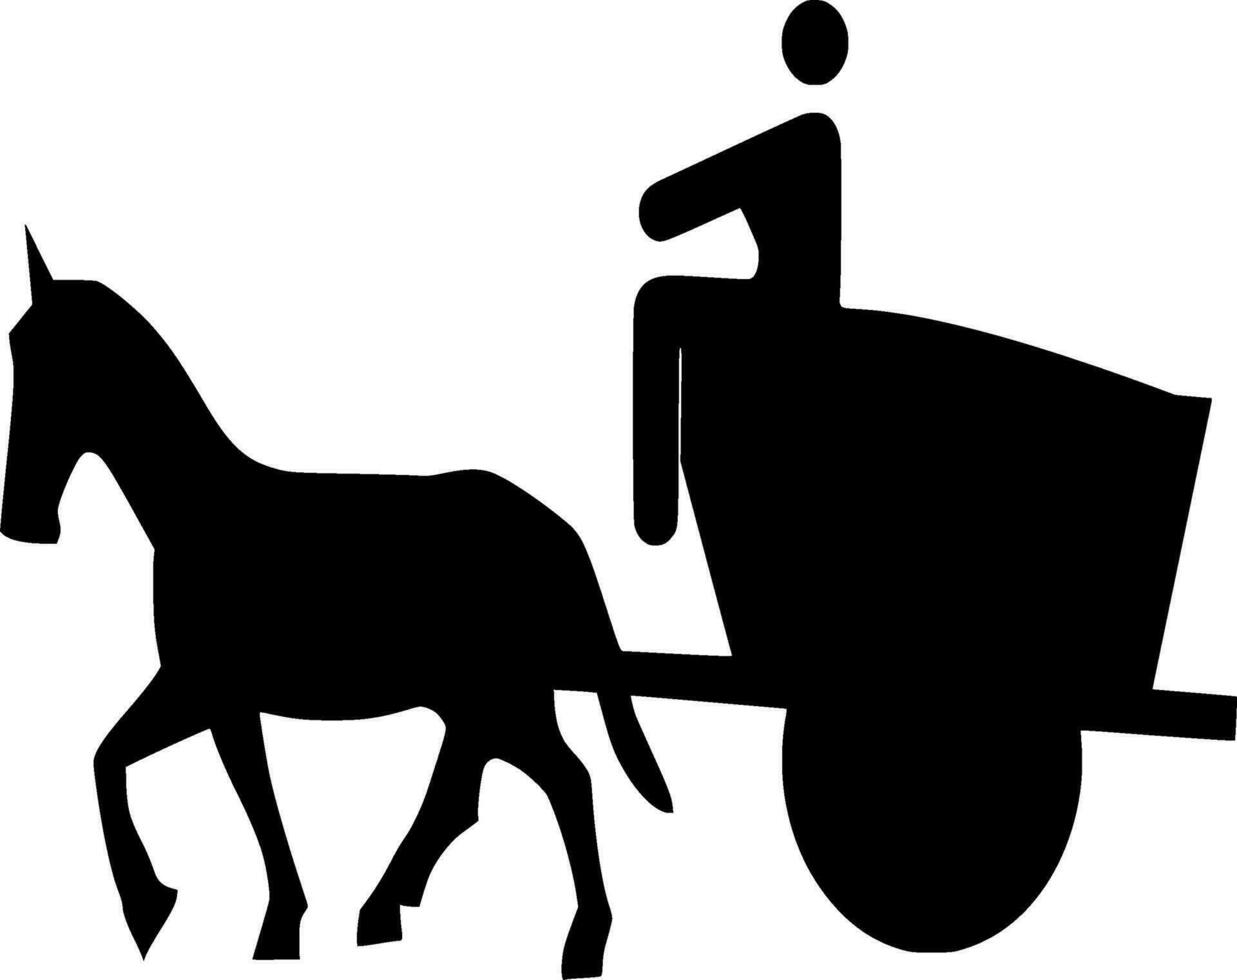 Carriage Silhouette Vector on white background